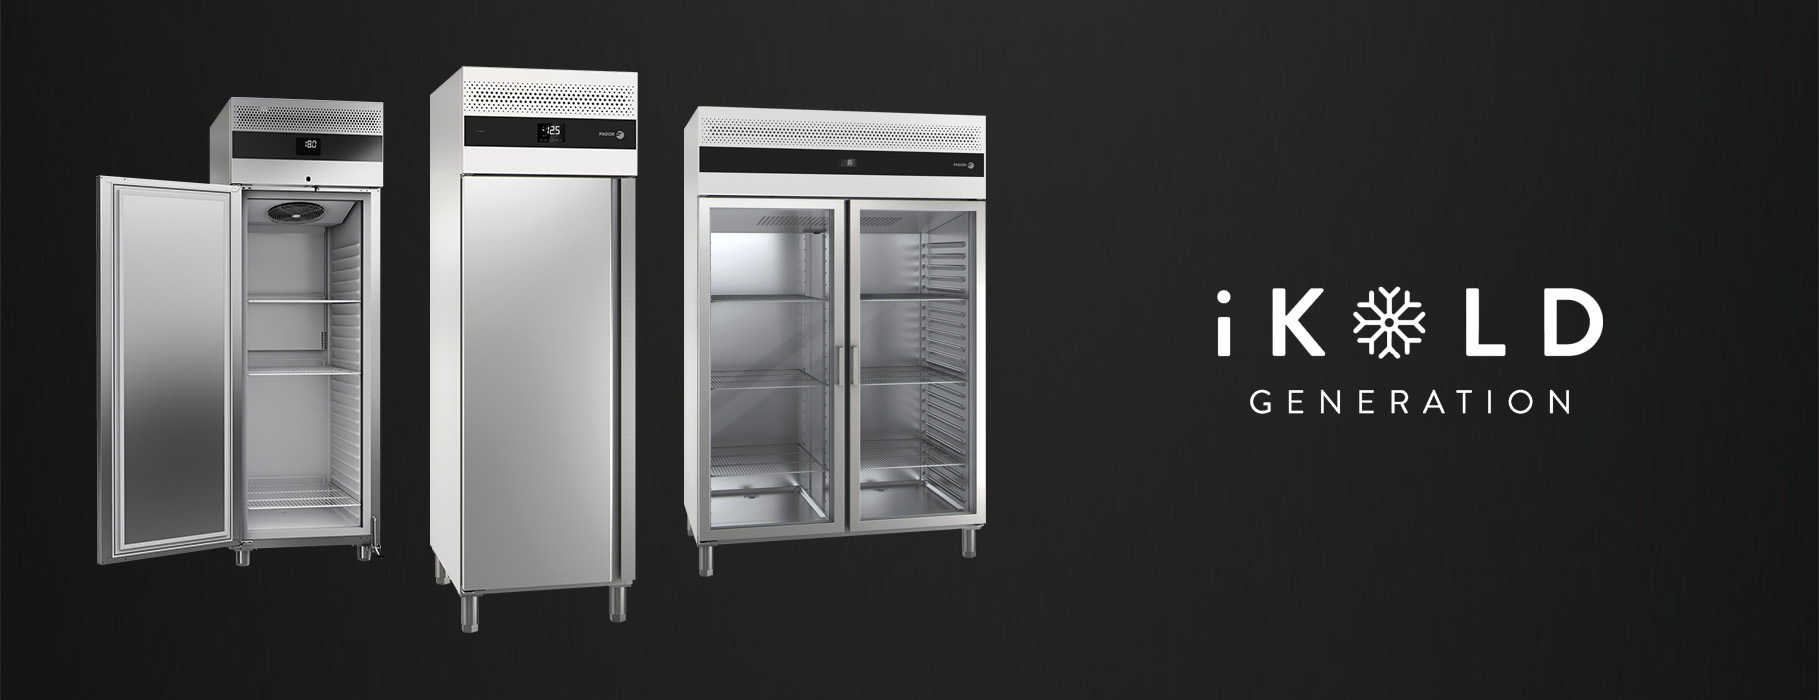 What Are the Different Types of Commercial Freezers?